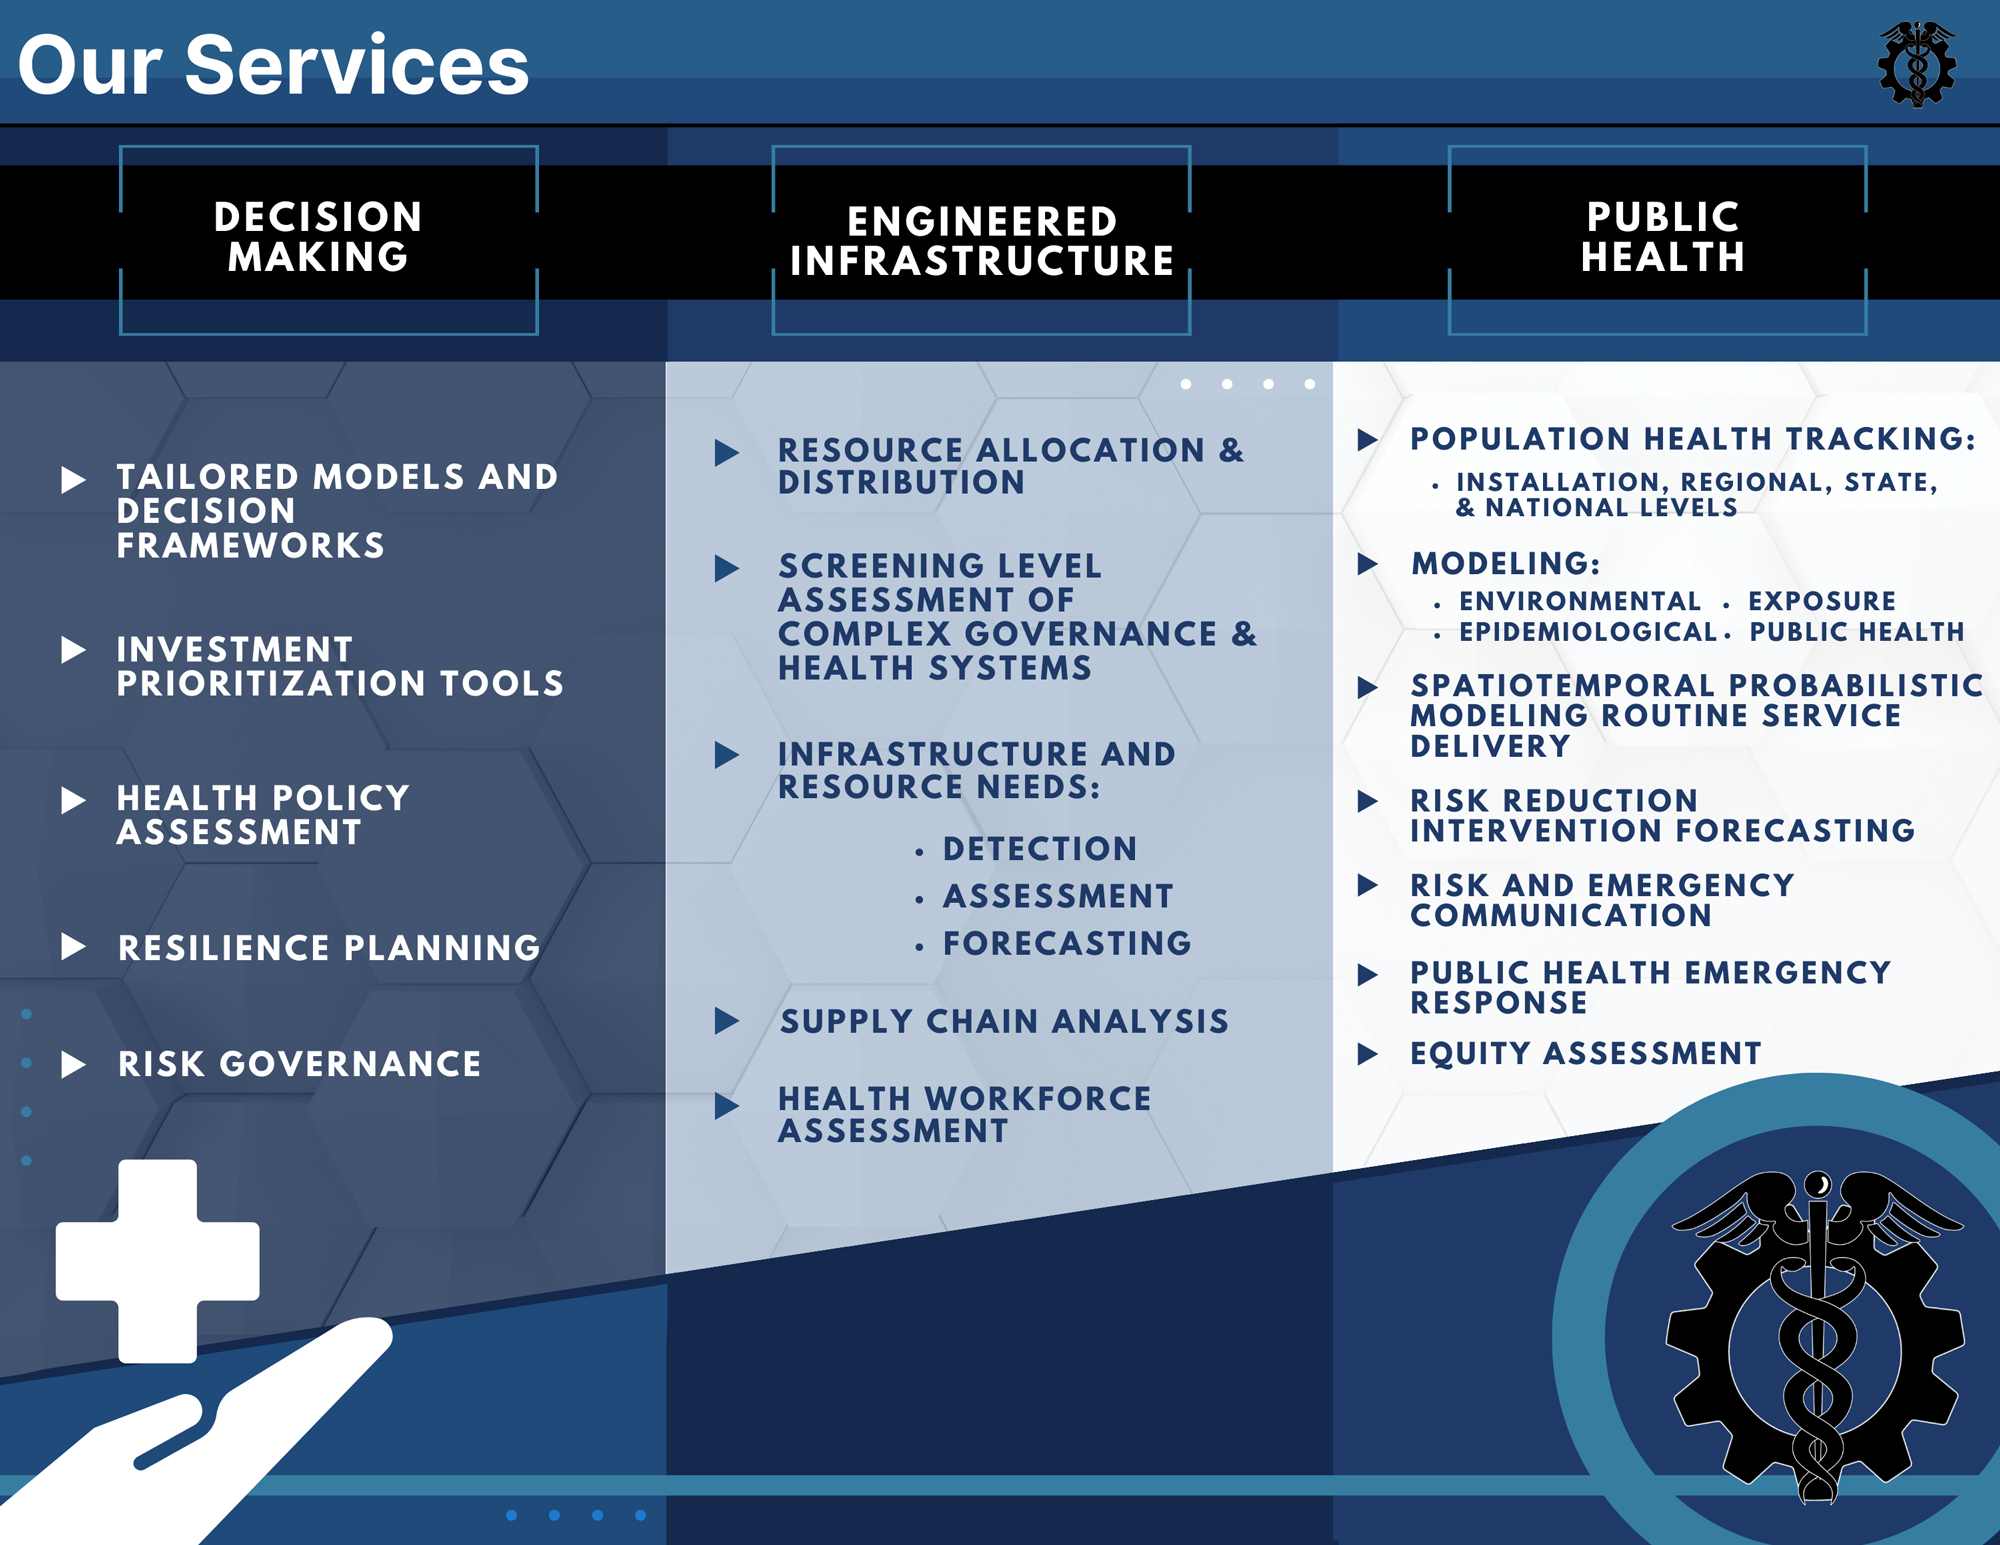 Our Services: Decision Making: - Tailored Models and Decision Frameworks, - Investment Prioritization Tools, - Health Policy Assessment, - Resilience Planning, - Risk Governance. Engineered Infrastructure: - Resource Allocation & Distribution, - Screening Level Assessment of Complex Governance & Health Systems, - Infrastructure and Resource Needs: Detection, Assessment, and Forecasting, - Supply Chain Analysis, - Health Workforce Assessment. Public Health: - Population Health Tracking: Installation, Regional, State, & National Levels, - Modeling: Environmental, Exposure, Epidemiological, and Public Health, - Spatiotemporal Probabilistic Modeling Routine Service Delivery, - Risk Reduction Intervention Forecasting, - Risk and Emergency Communication, - Public Health Emergency Response, - Equity Assessment.